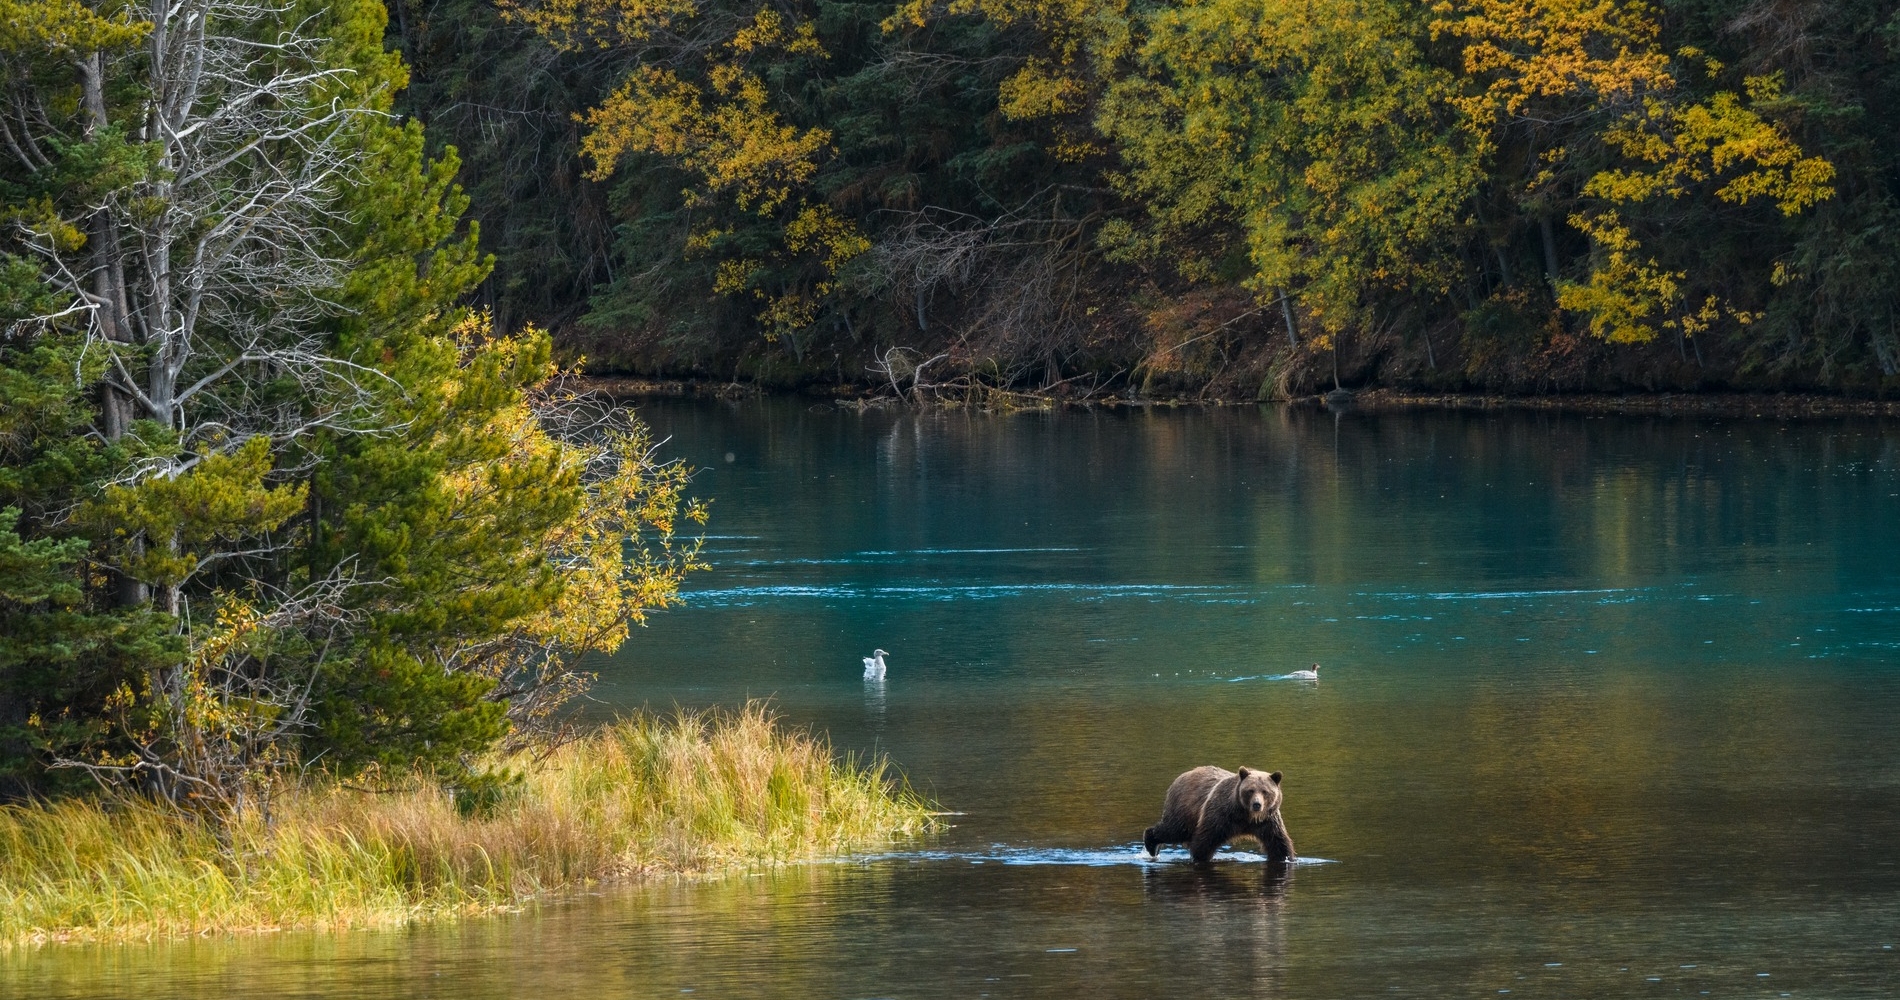 Grizzly bear in a river